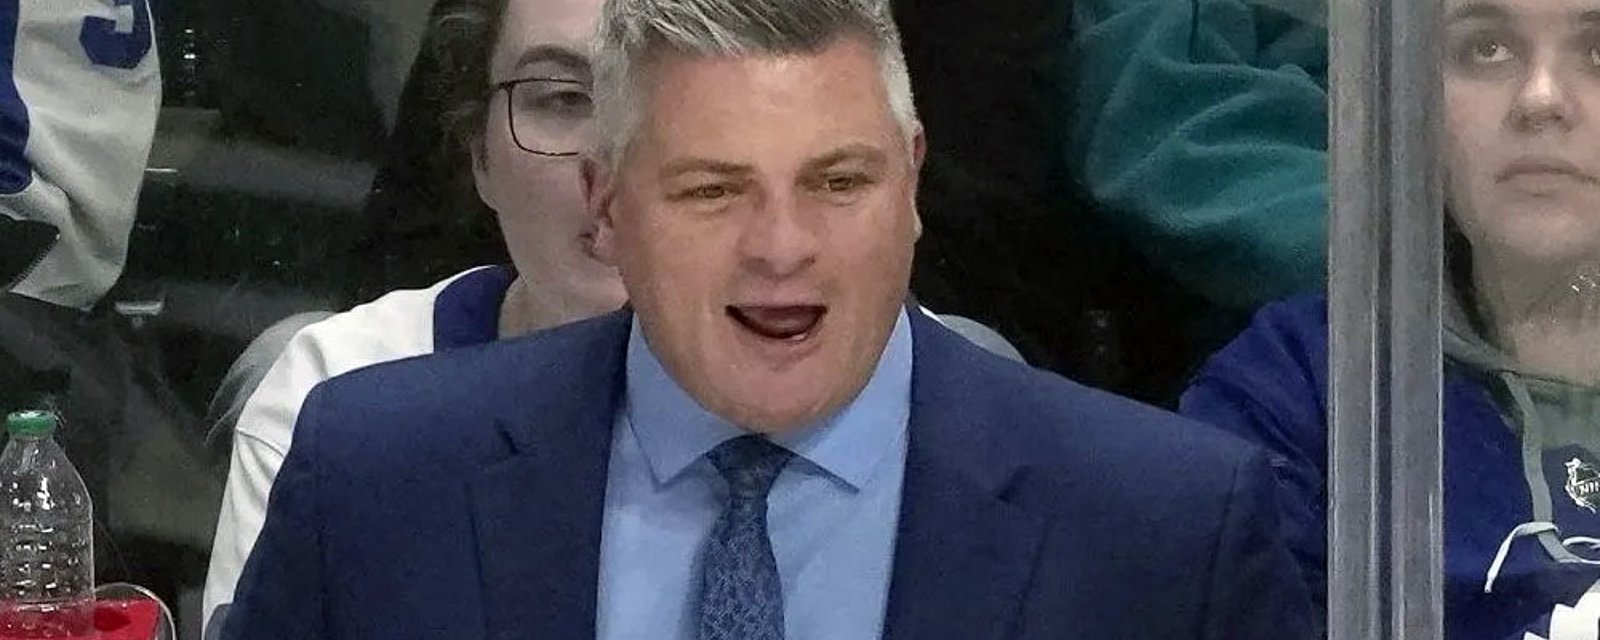 Sheldon Keefe punished by the NHL for his “unprofessional conduct”